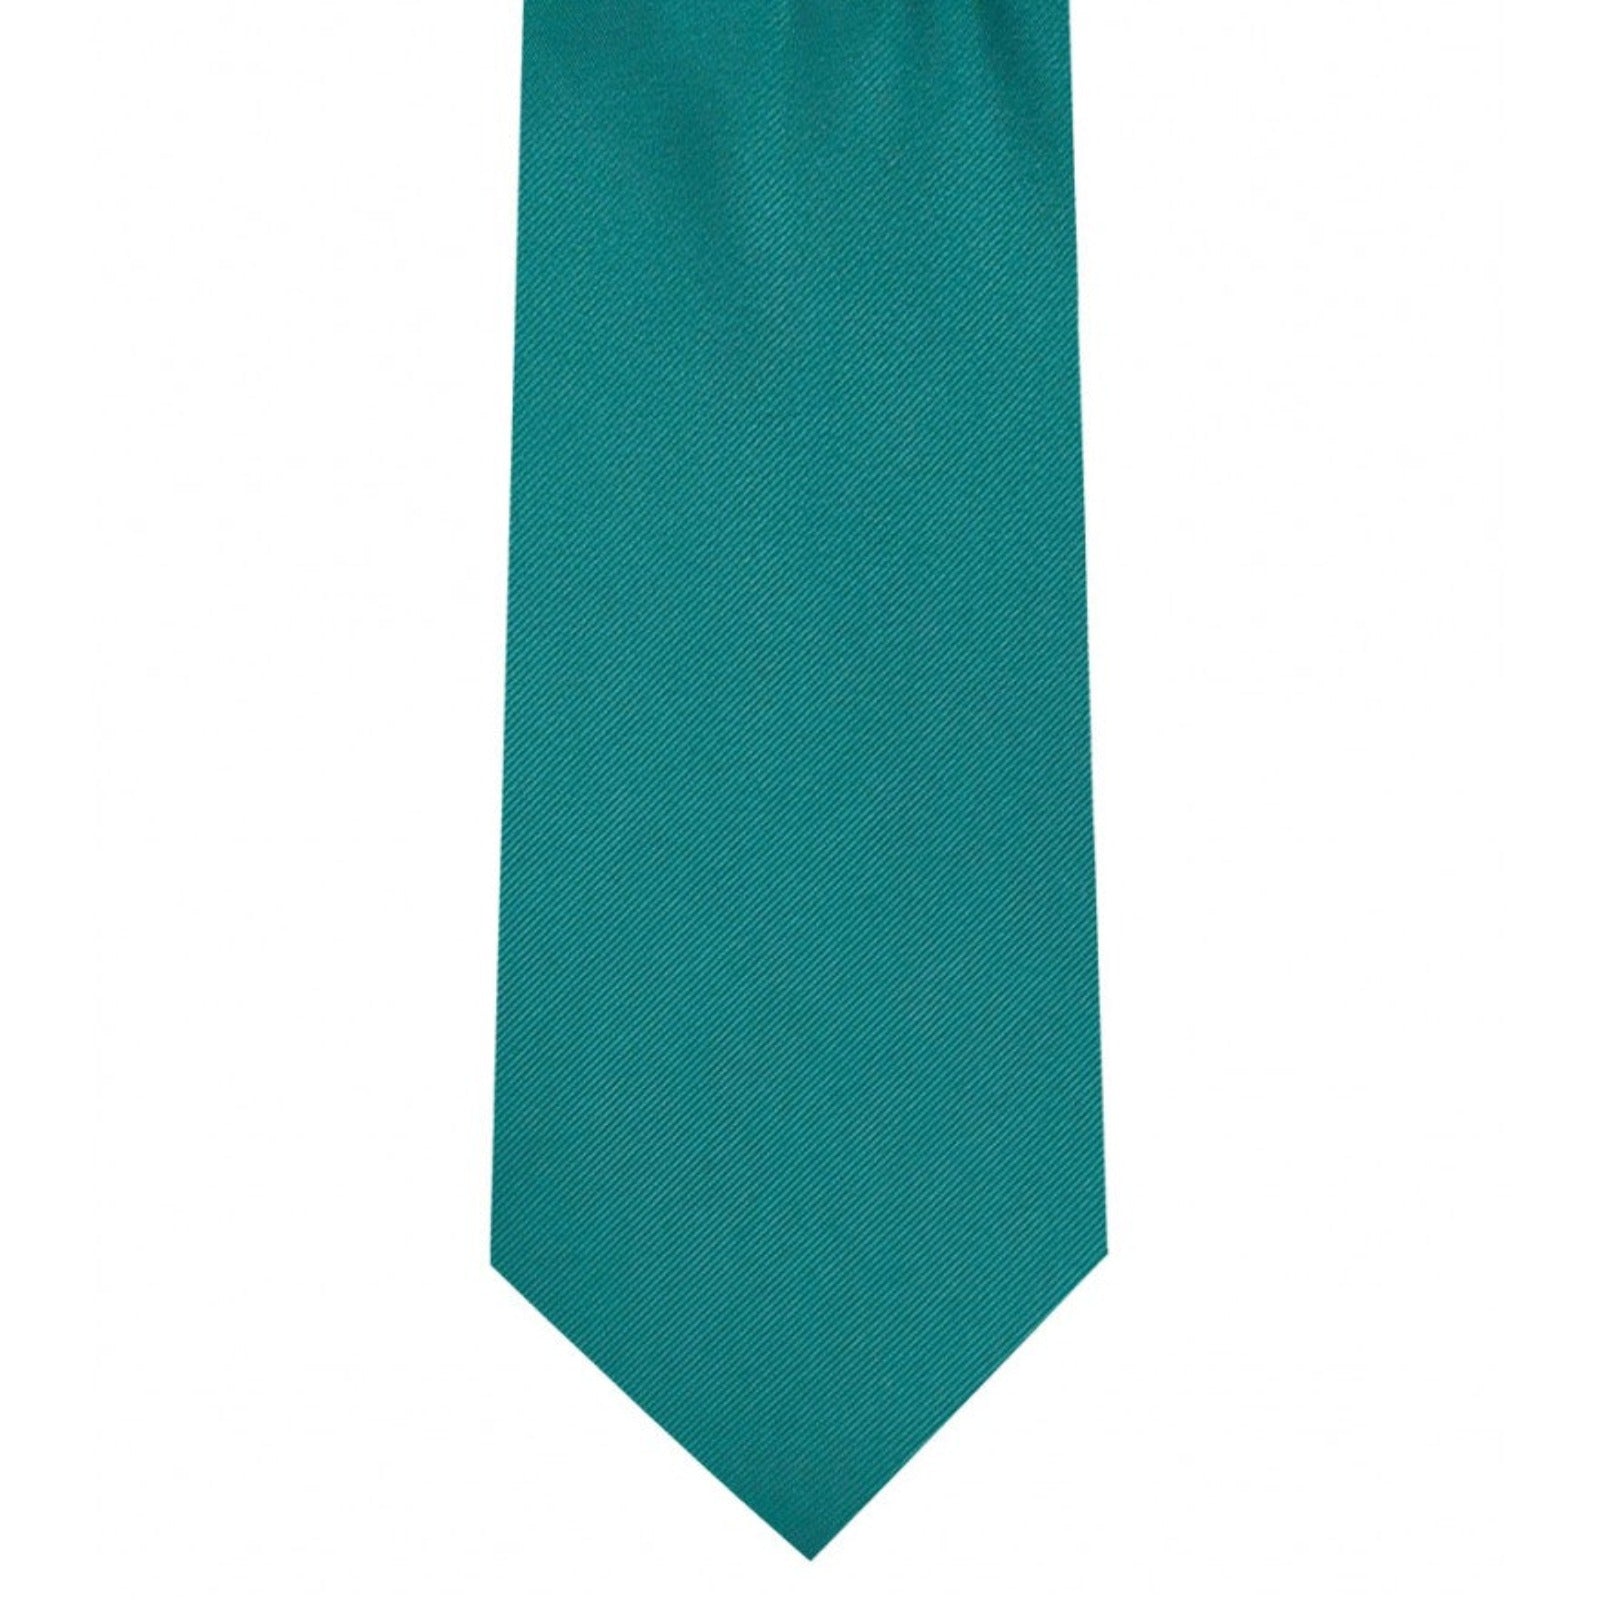 Classic Teal Tie Ultra Skinny tie width 2.25 inches With Matching Pocket Square | KCT Menswear